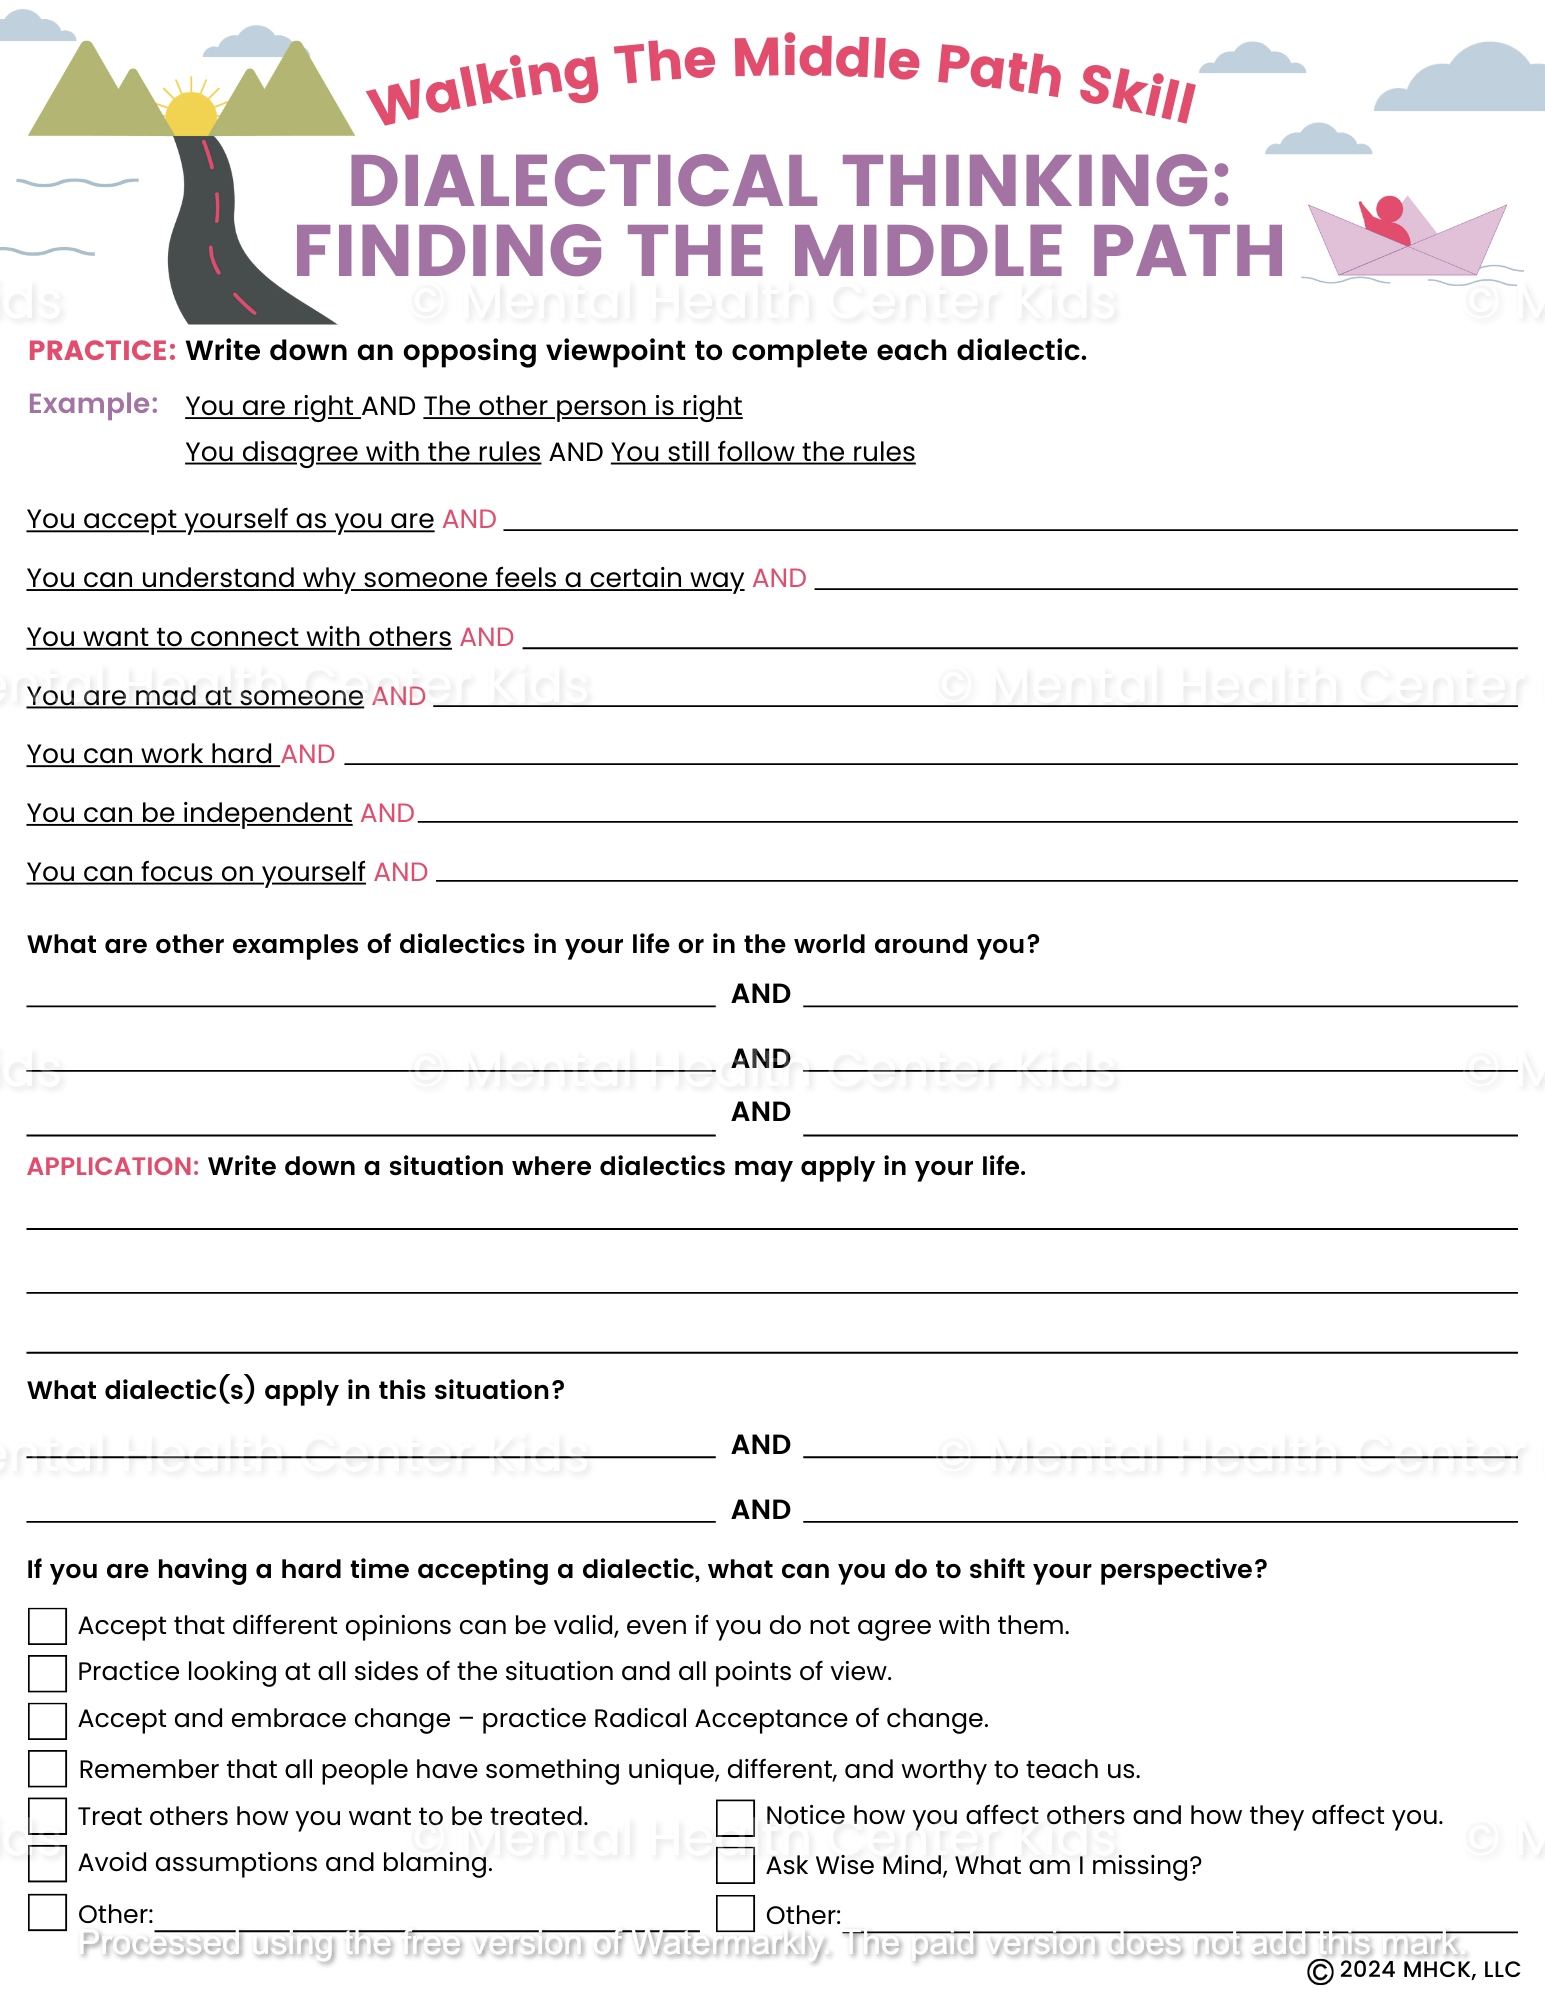 dialectical thinking dbt worksheet